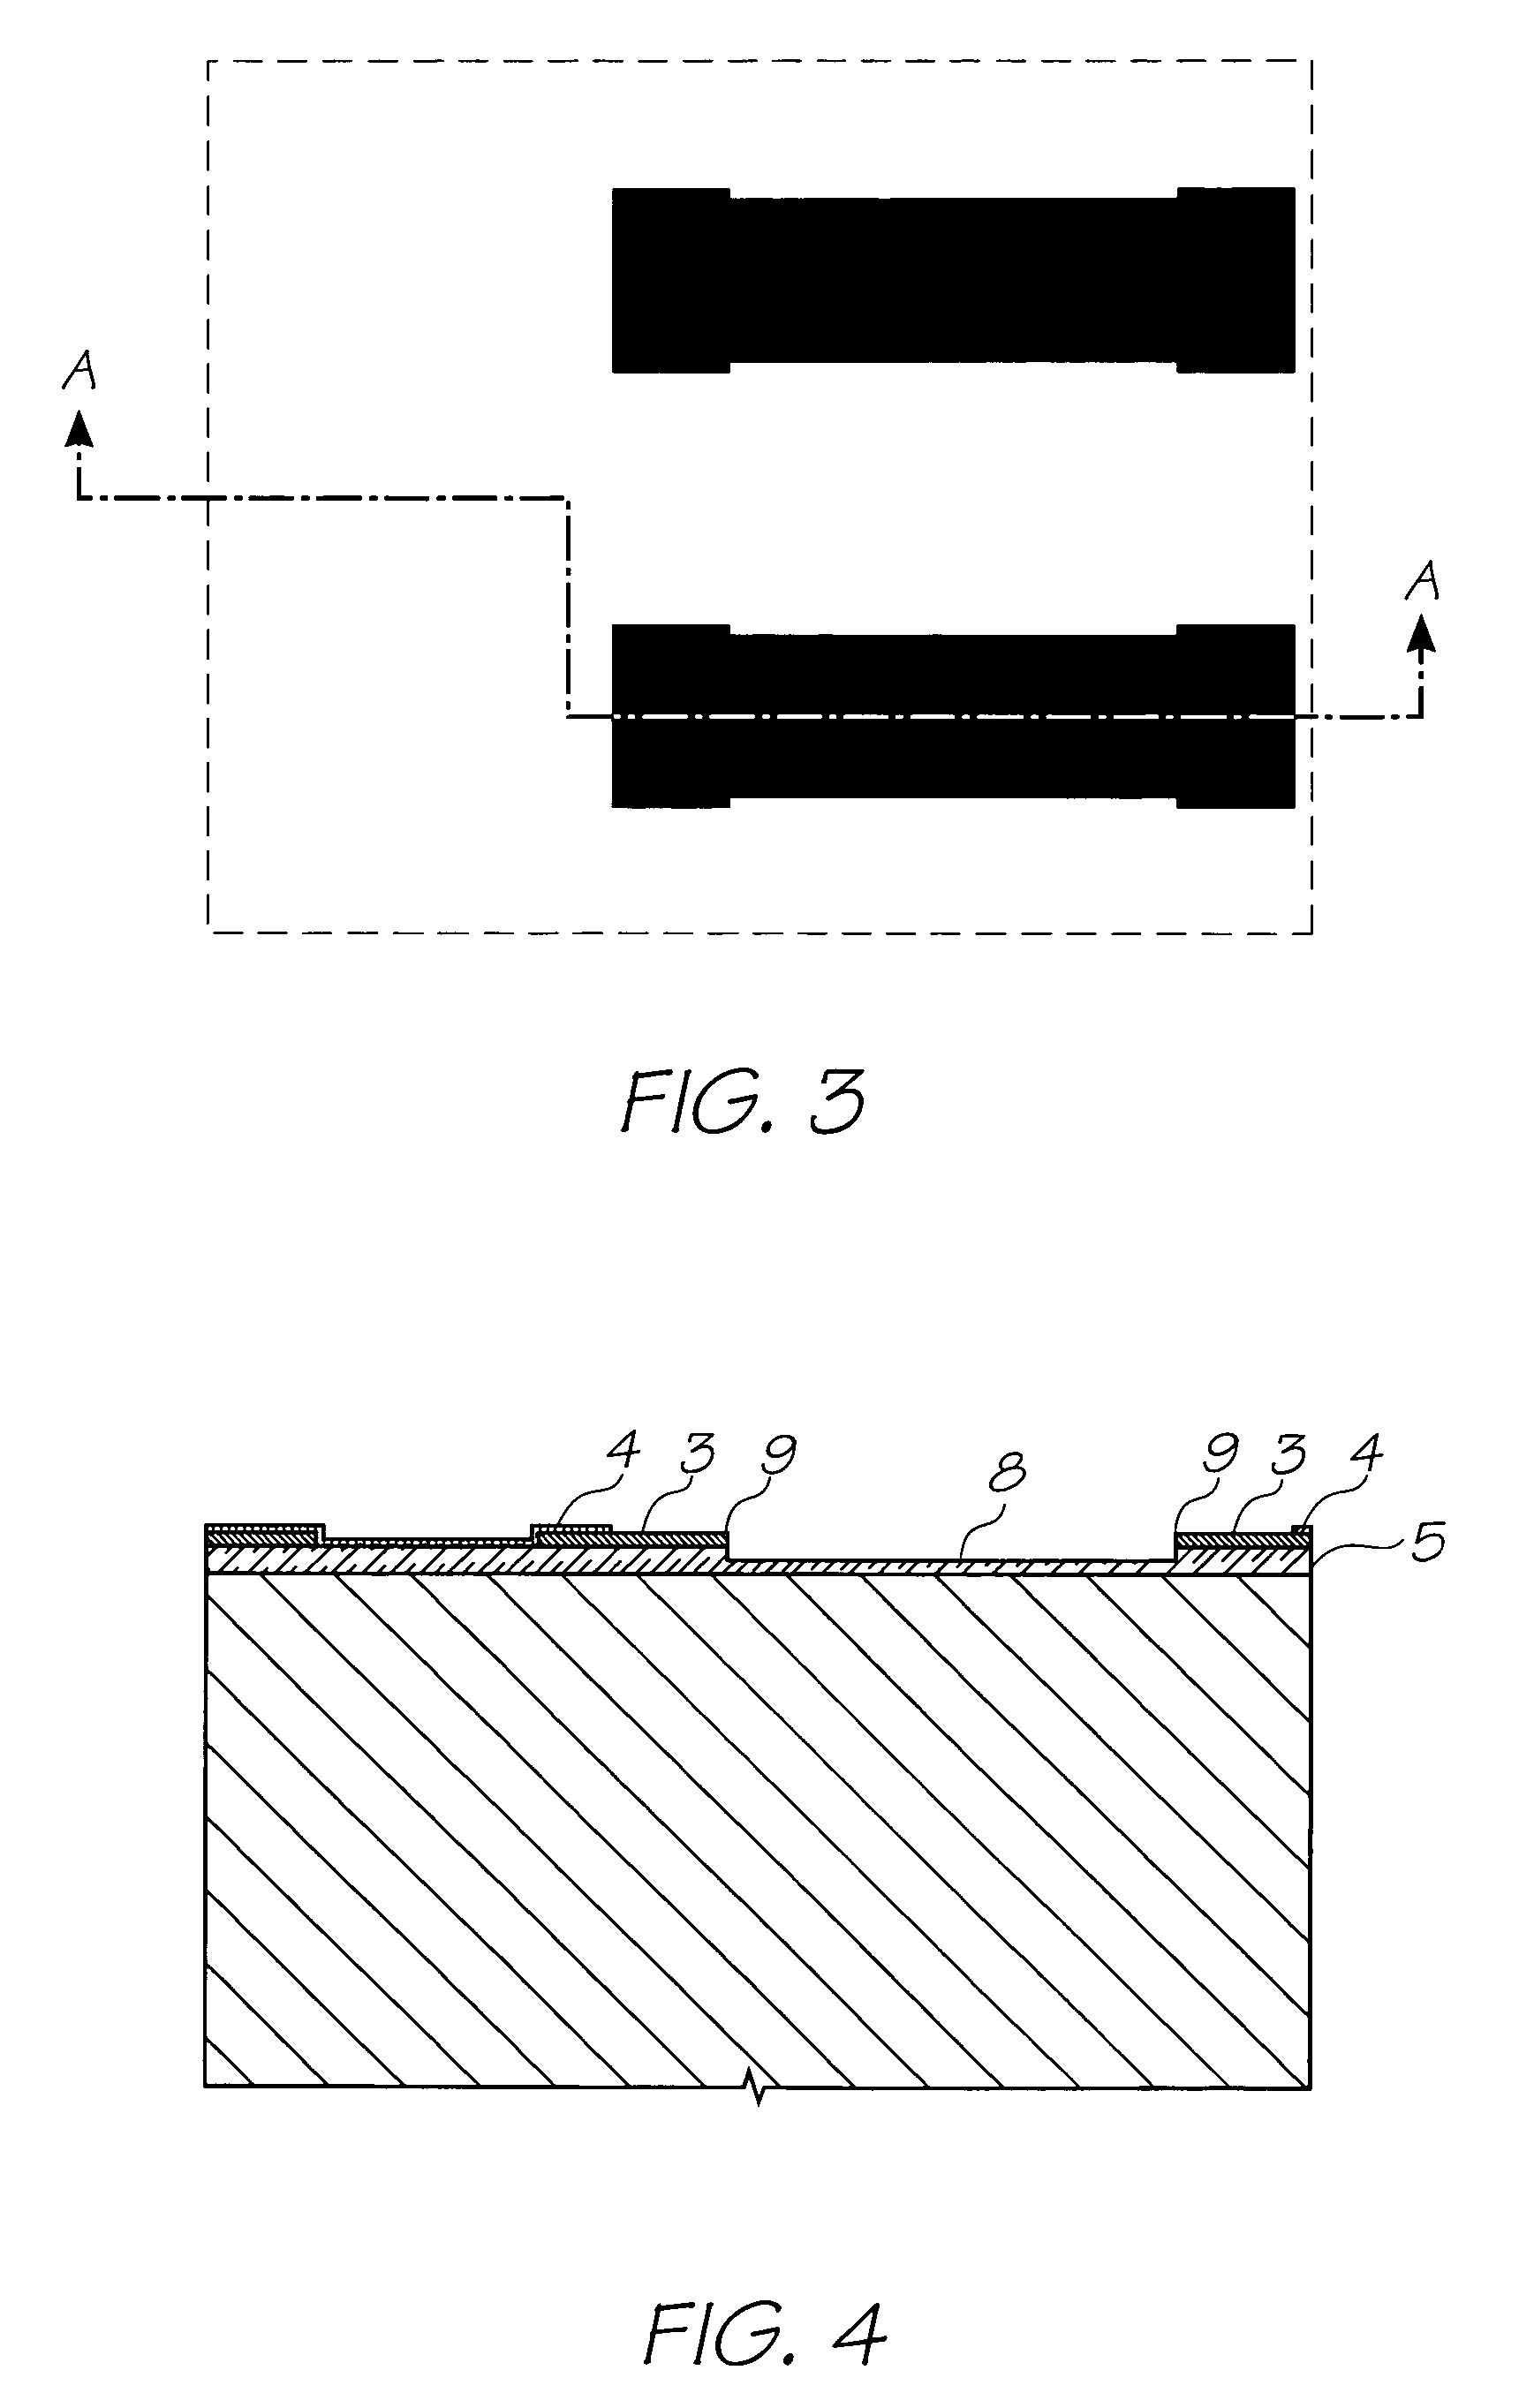 Method of forming low-stiction nozzle plate for an inkjet printhead